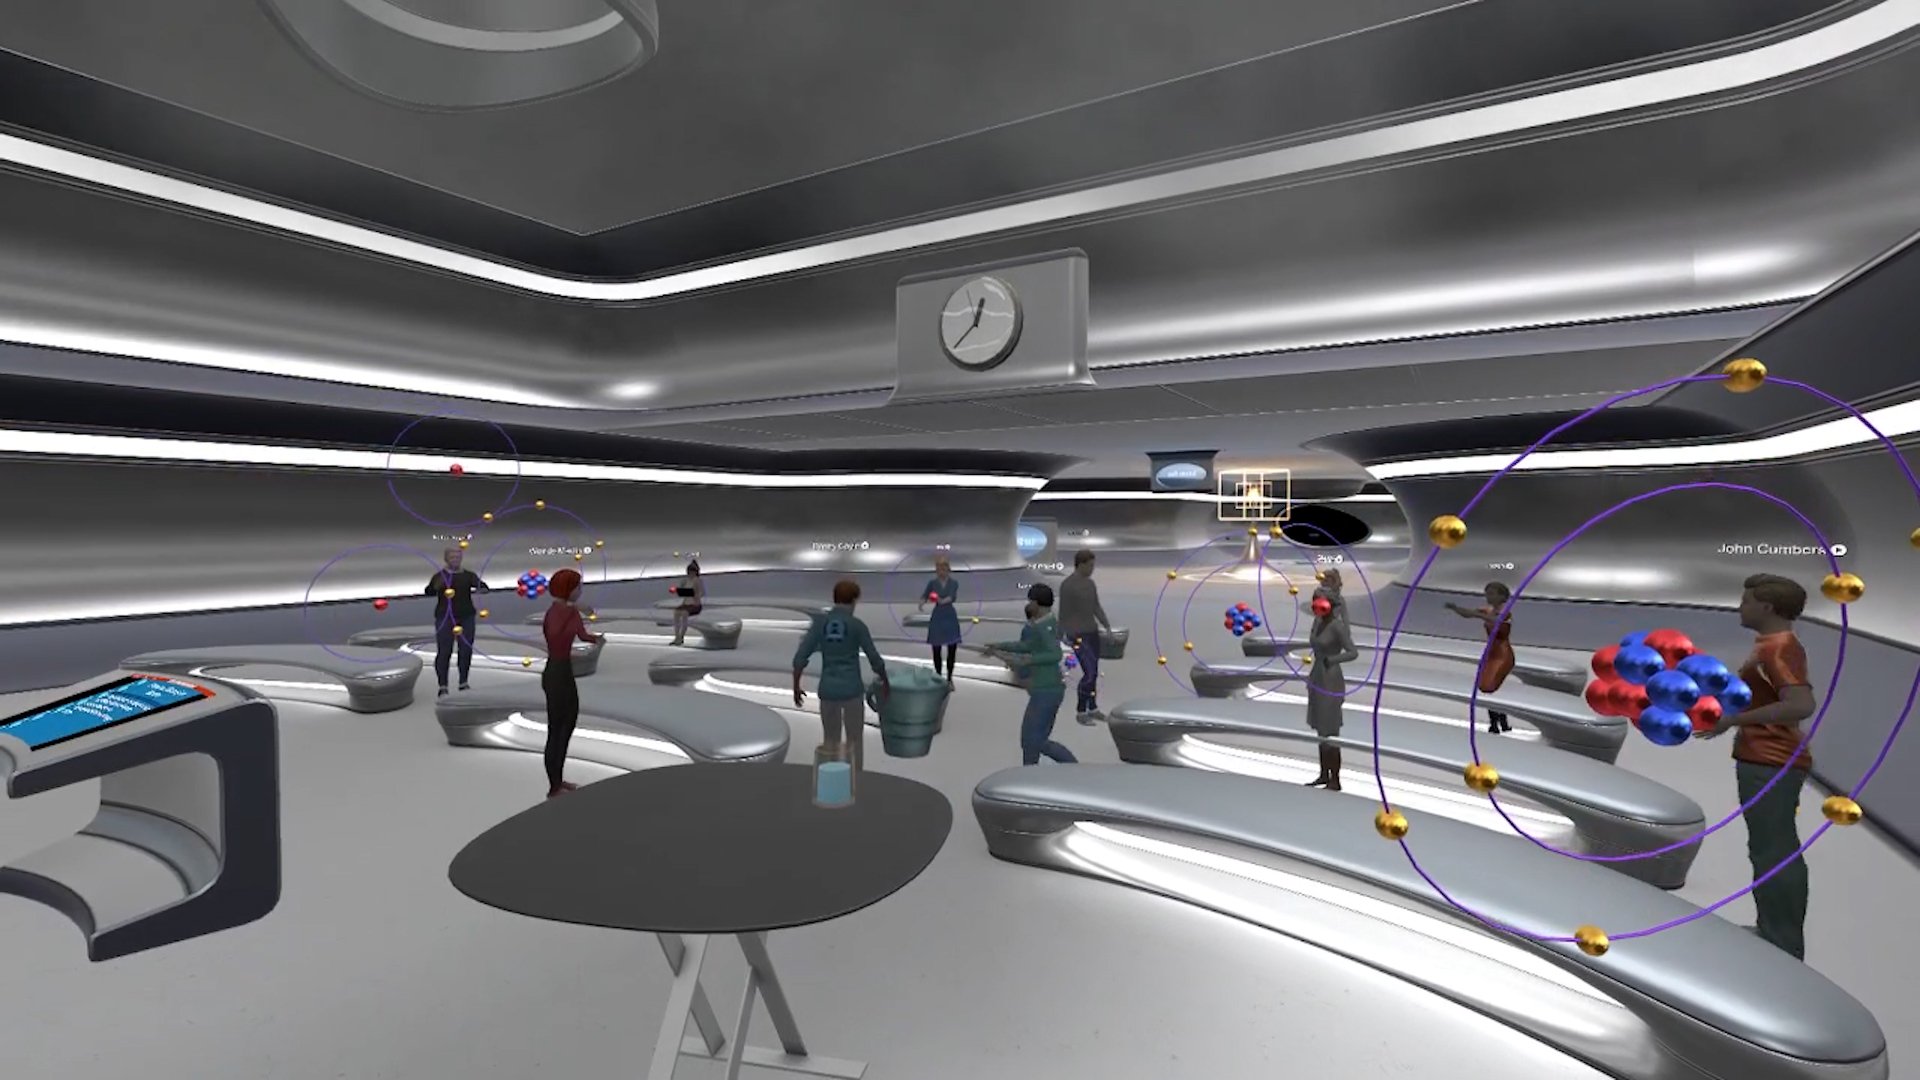 In a futuristic classroom, students observe atoms in the metaverse as part of a chemistry course. 